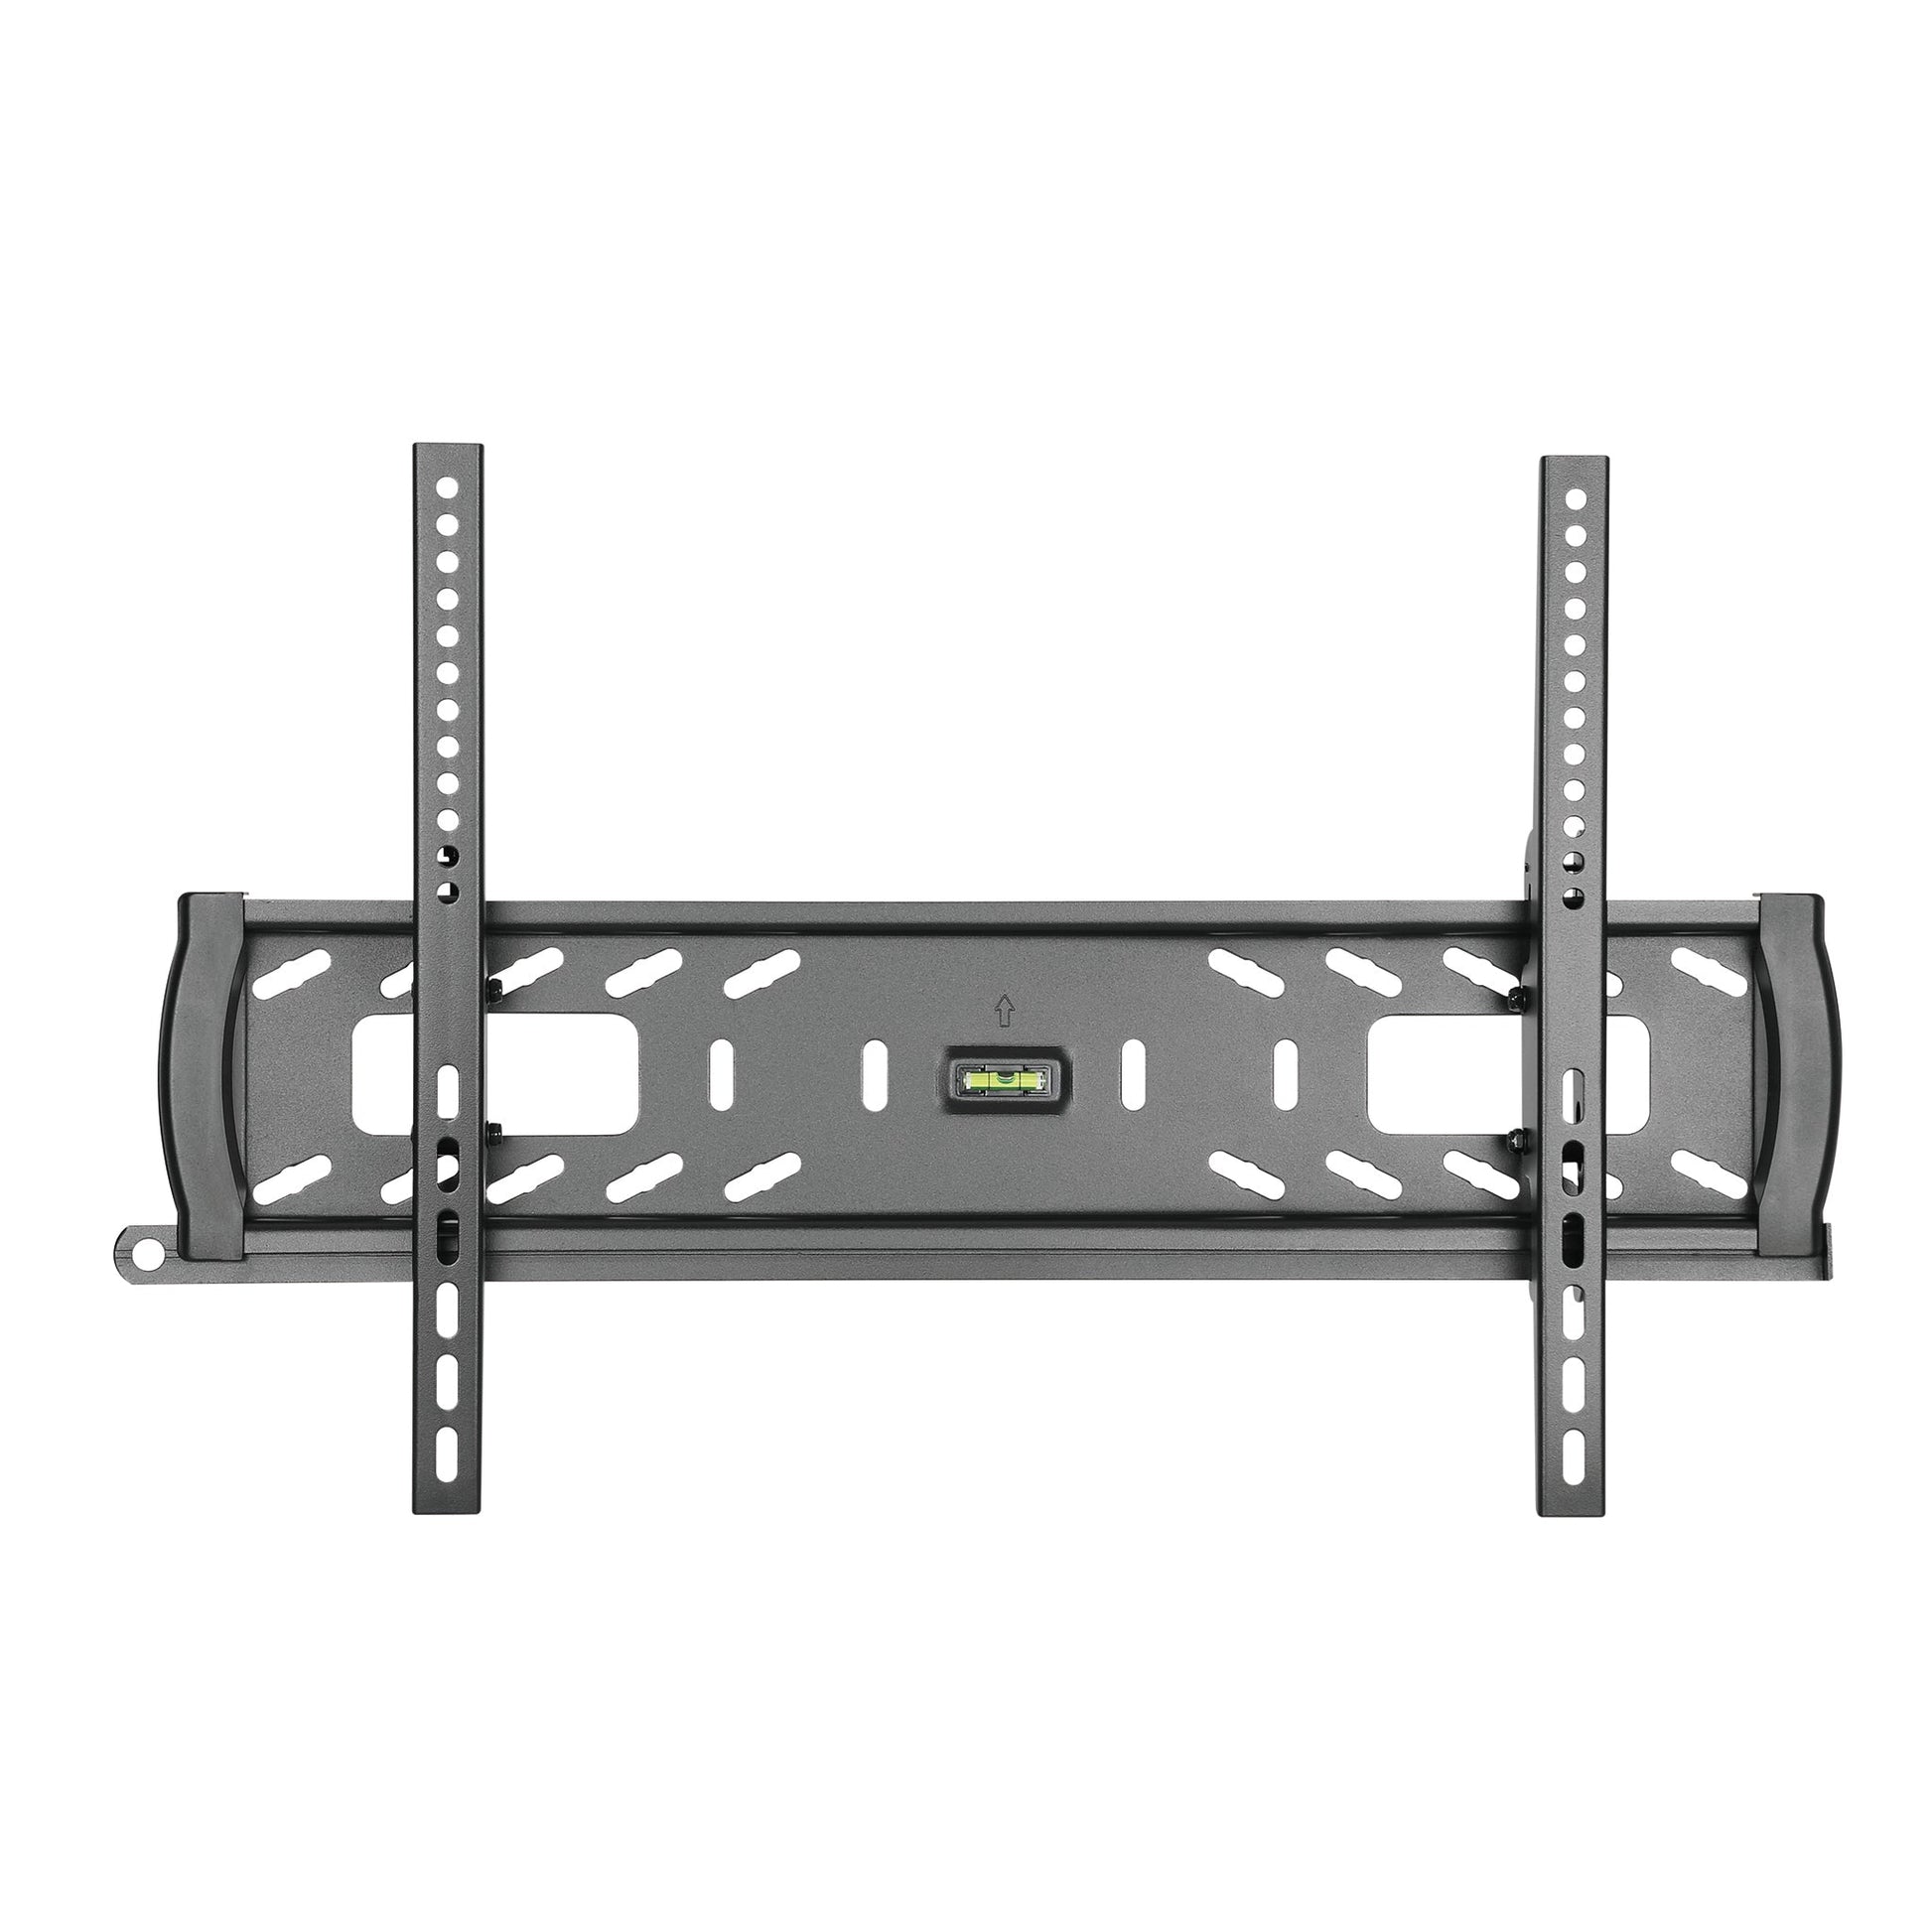 Tilt TV Mount for 40" to 75" TVs up to 150Ibs (AMT6401) freeshipping - One Products